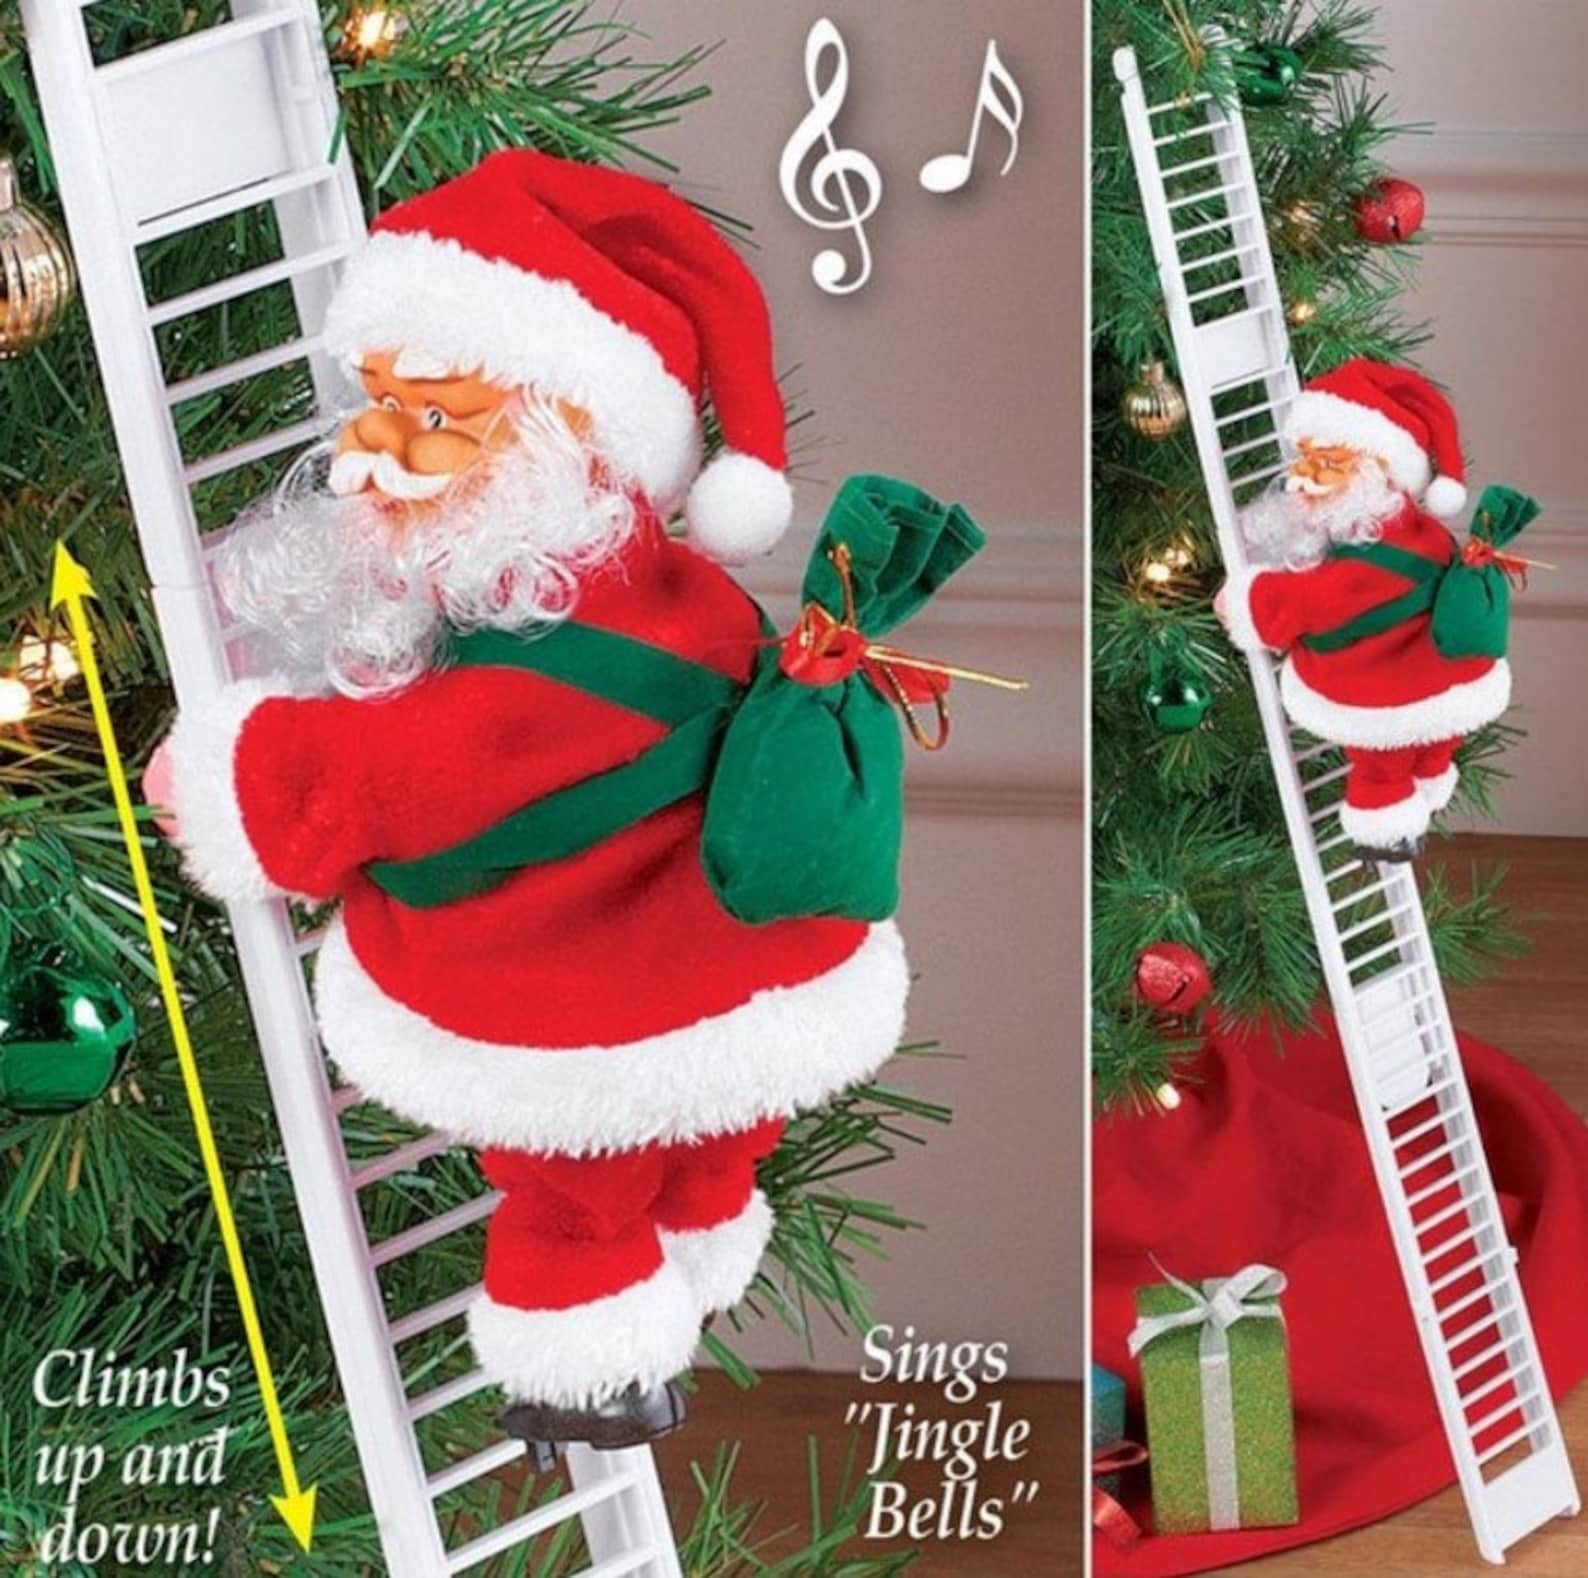 Climbing Ladder Electric Santa Claus Climbing Red Ladder Up Tree Doll Toy